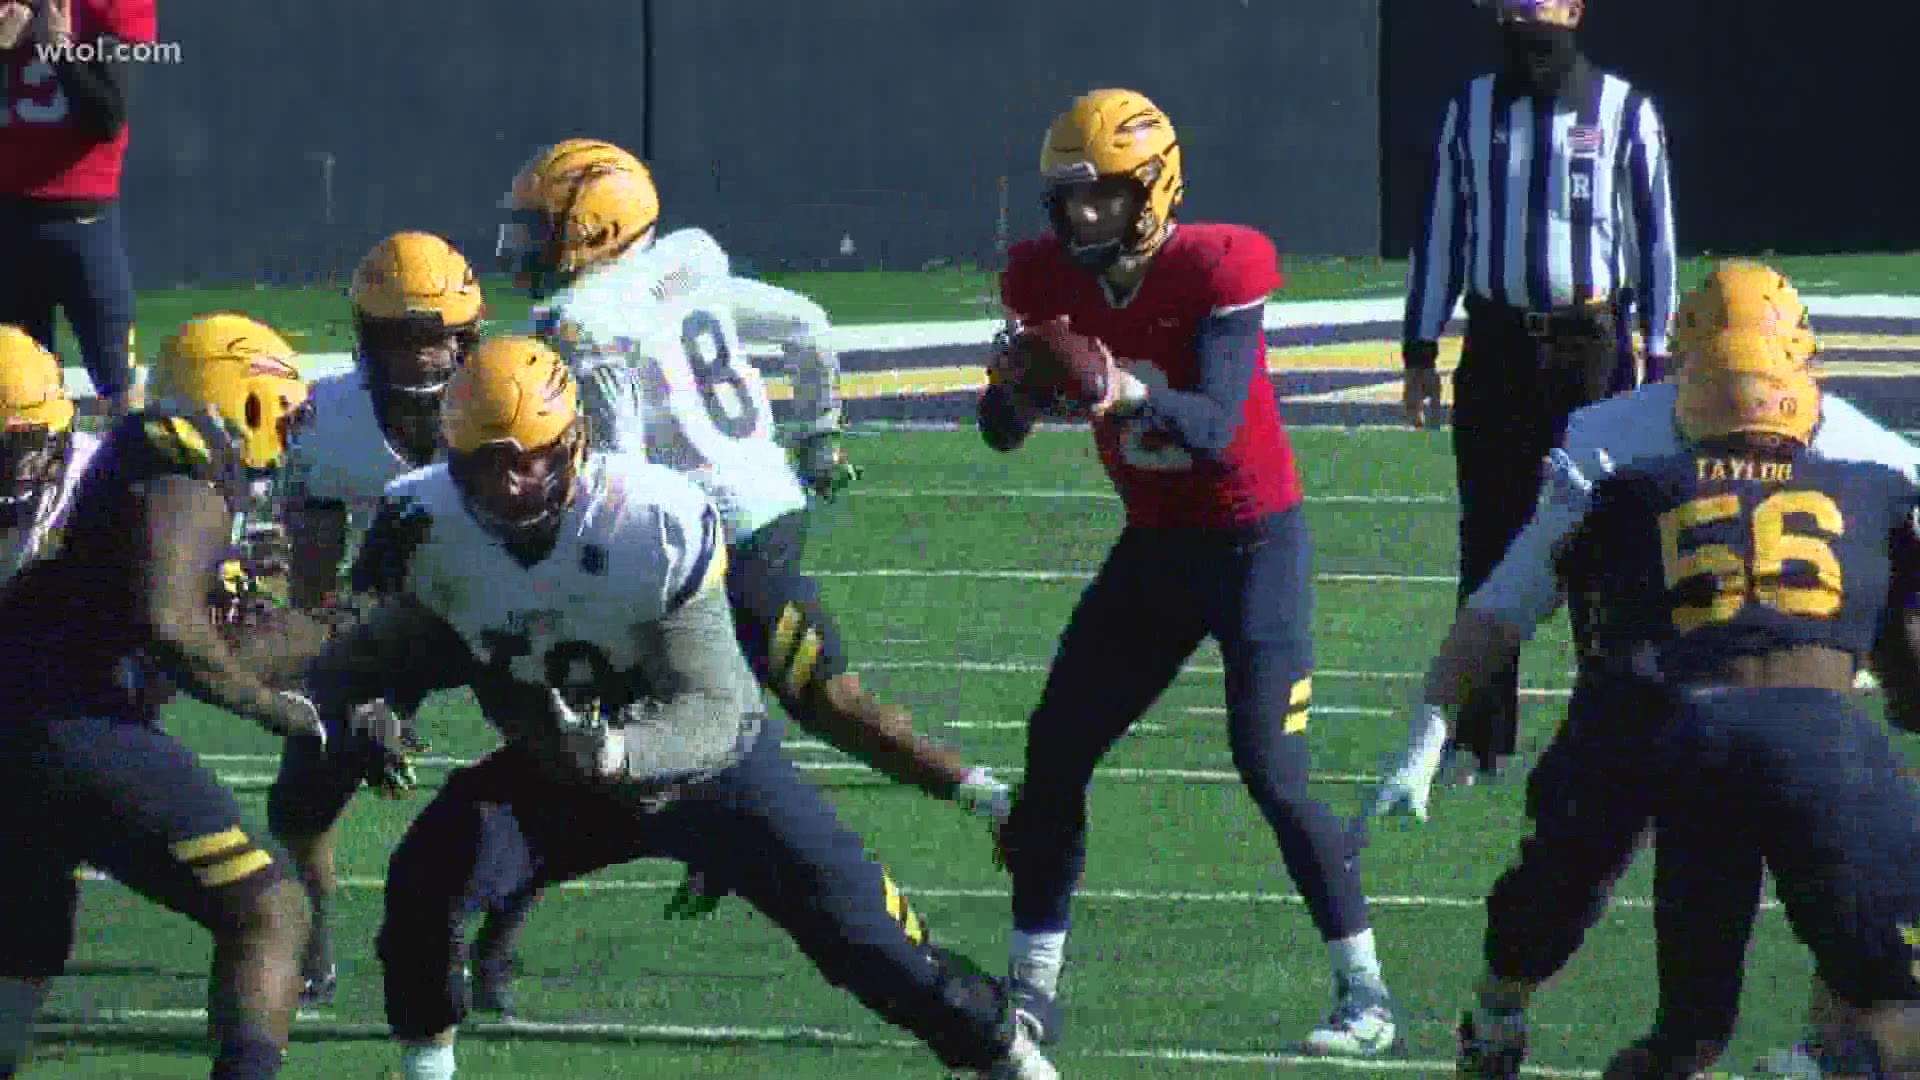 The Rockets held a scrimmage inside the Glass Bowl as their spring season came to a close. Toledo opens up the regular season on Sept. 4 against Norfolk St.